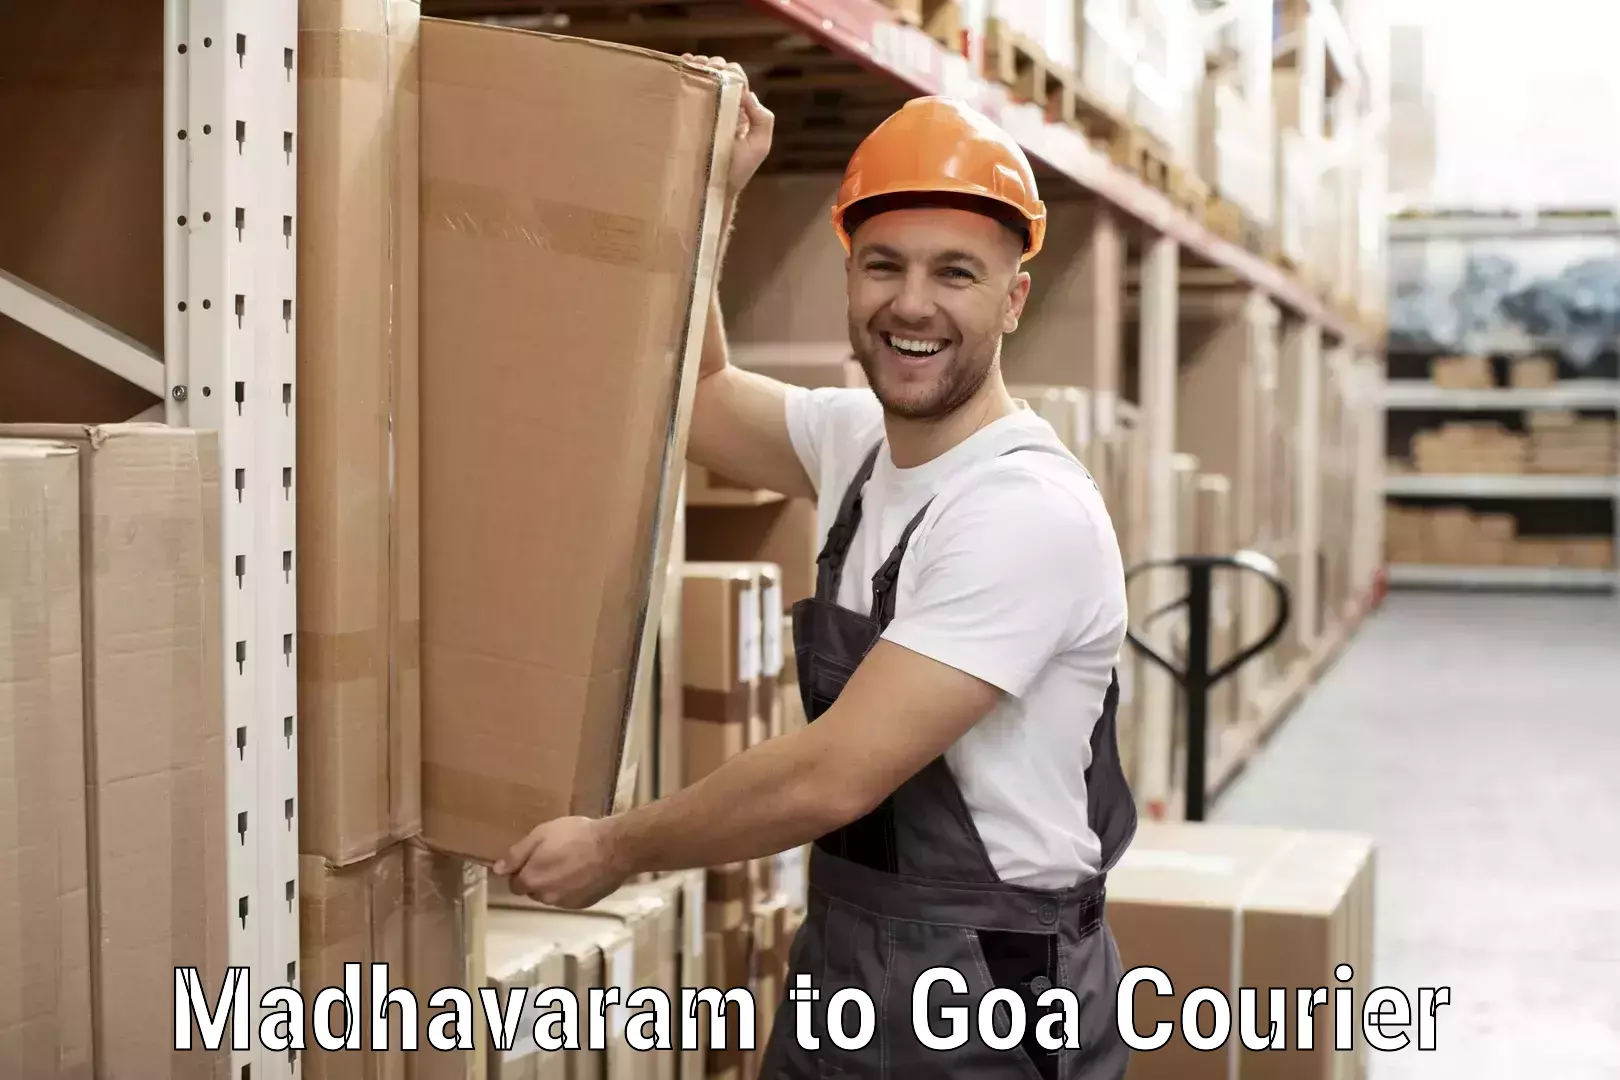 Express delivery network Madhavaram to IIT Goa